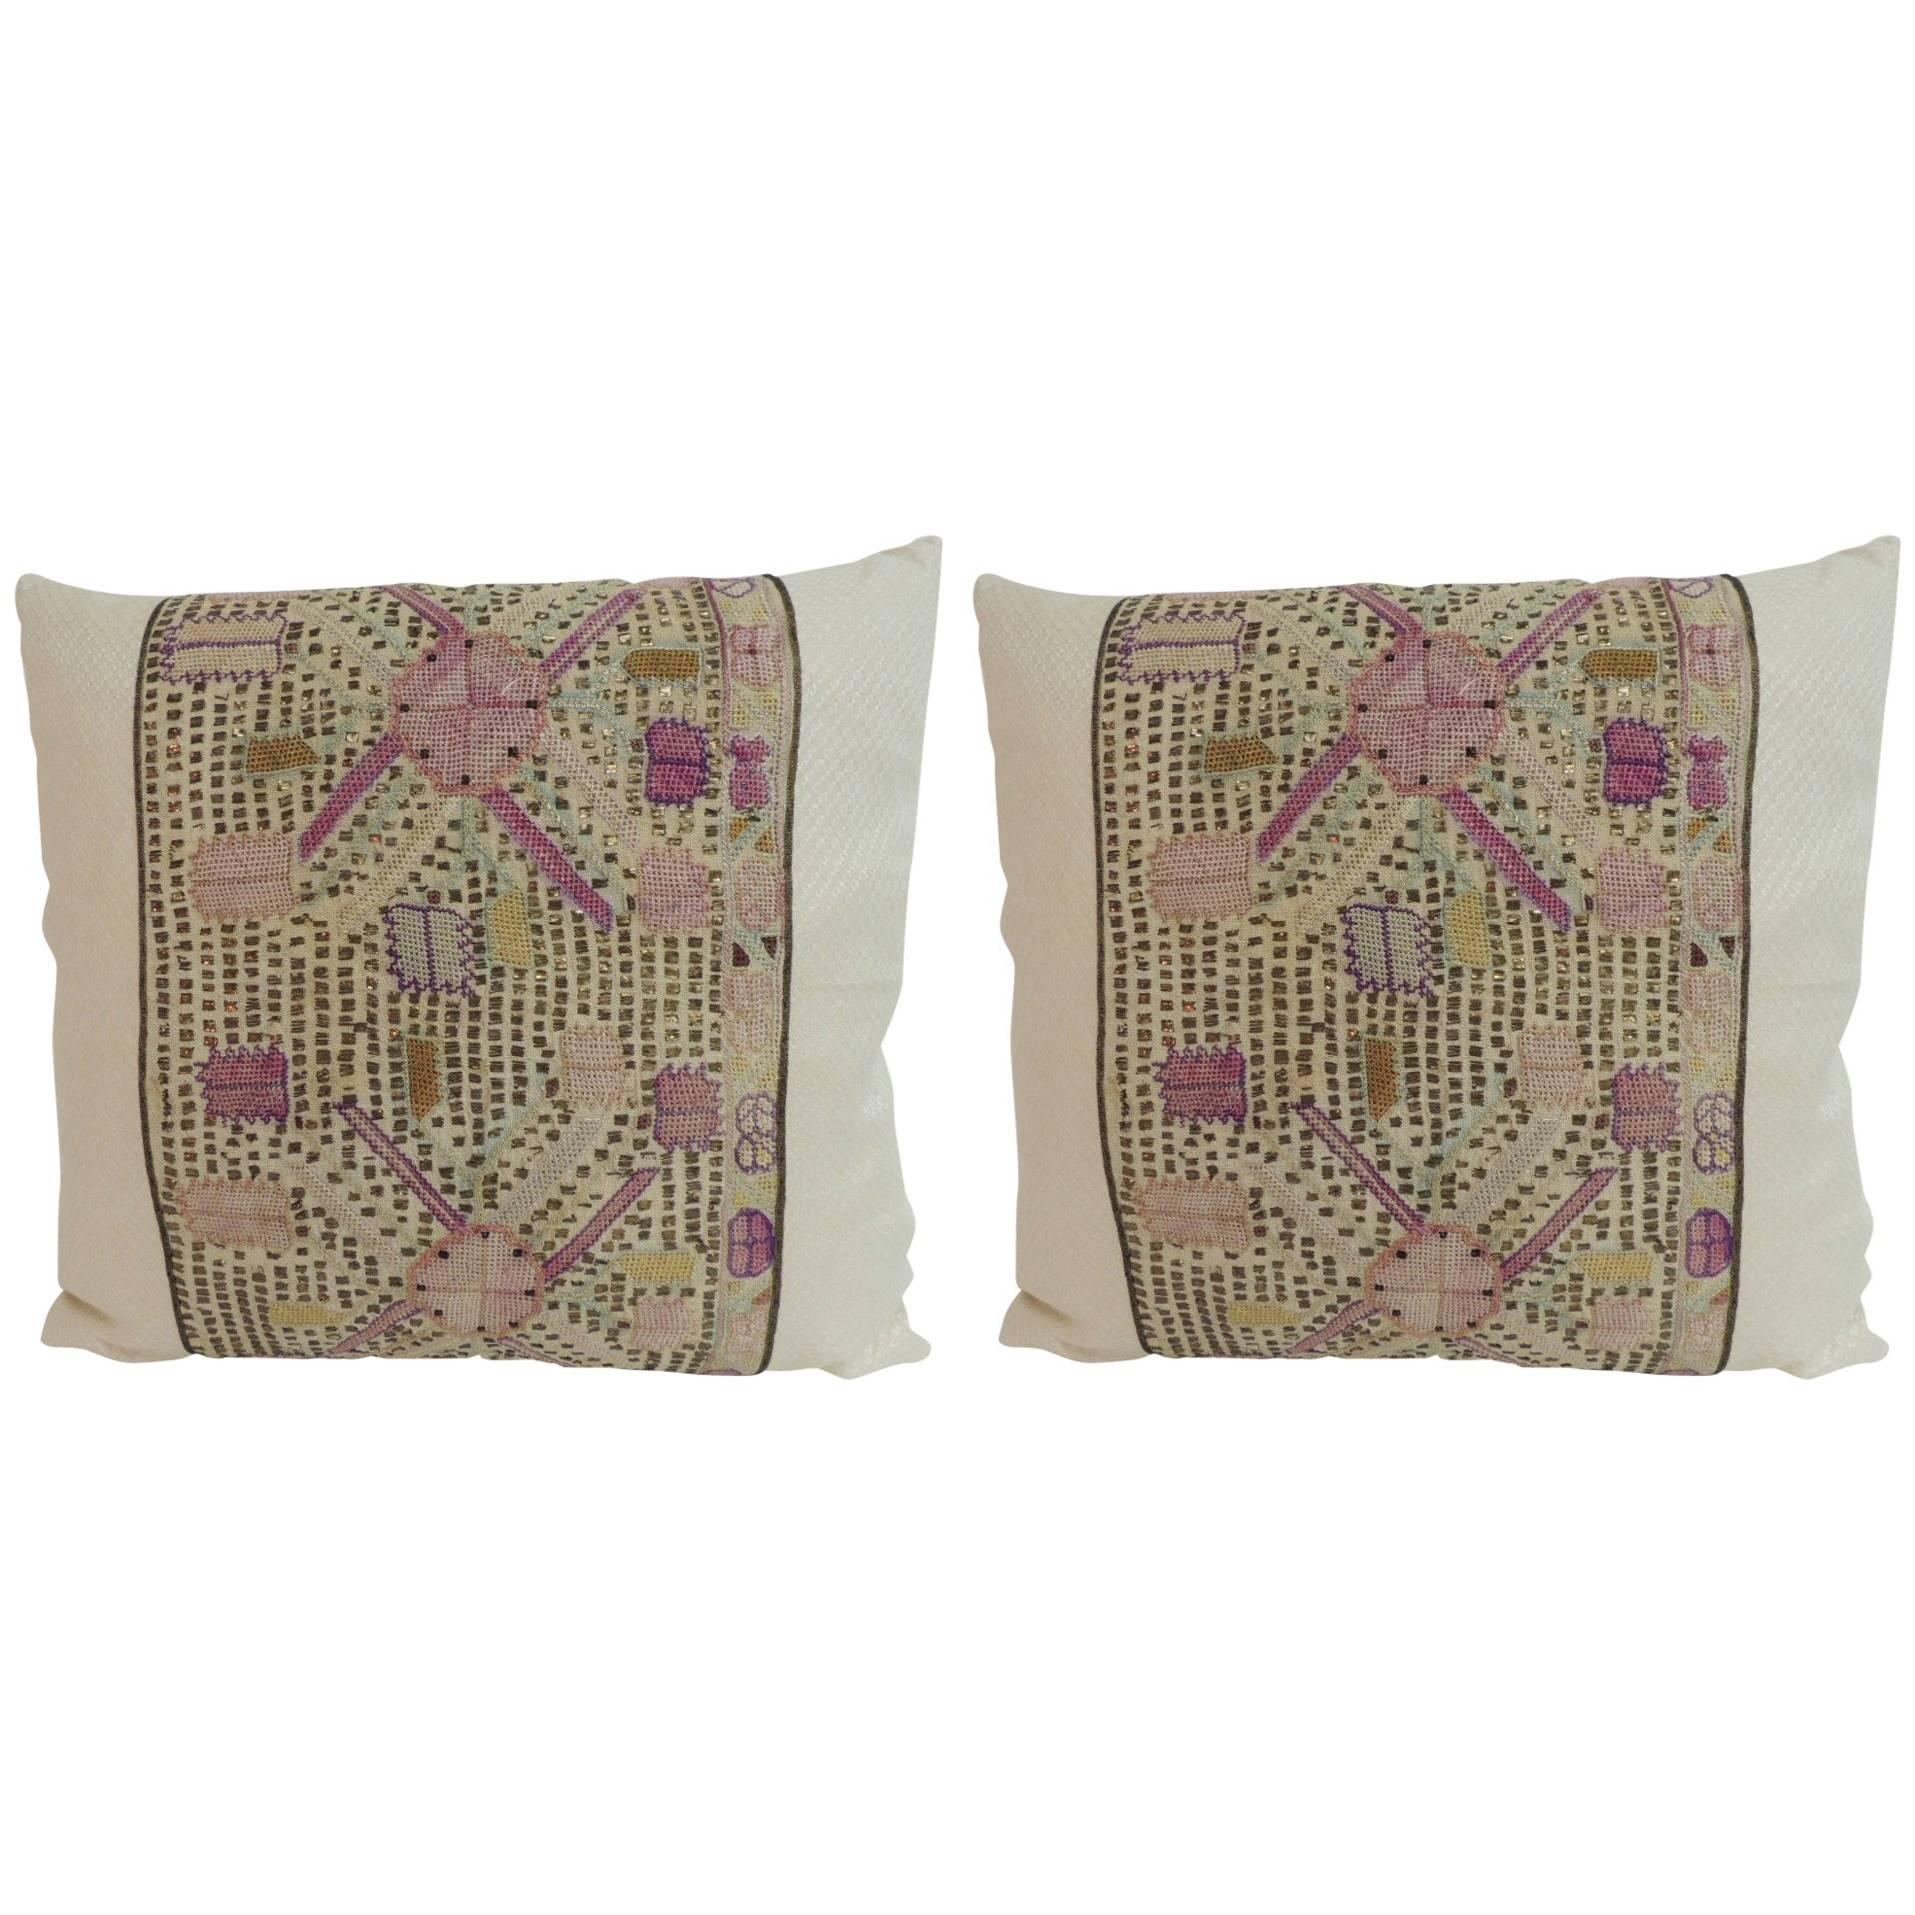 Pair of 19th Century Turkish Embroidered Linen Square Decorative Pillows